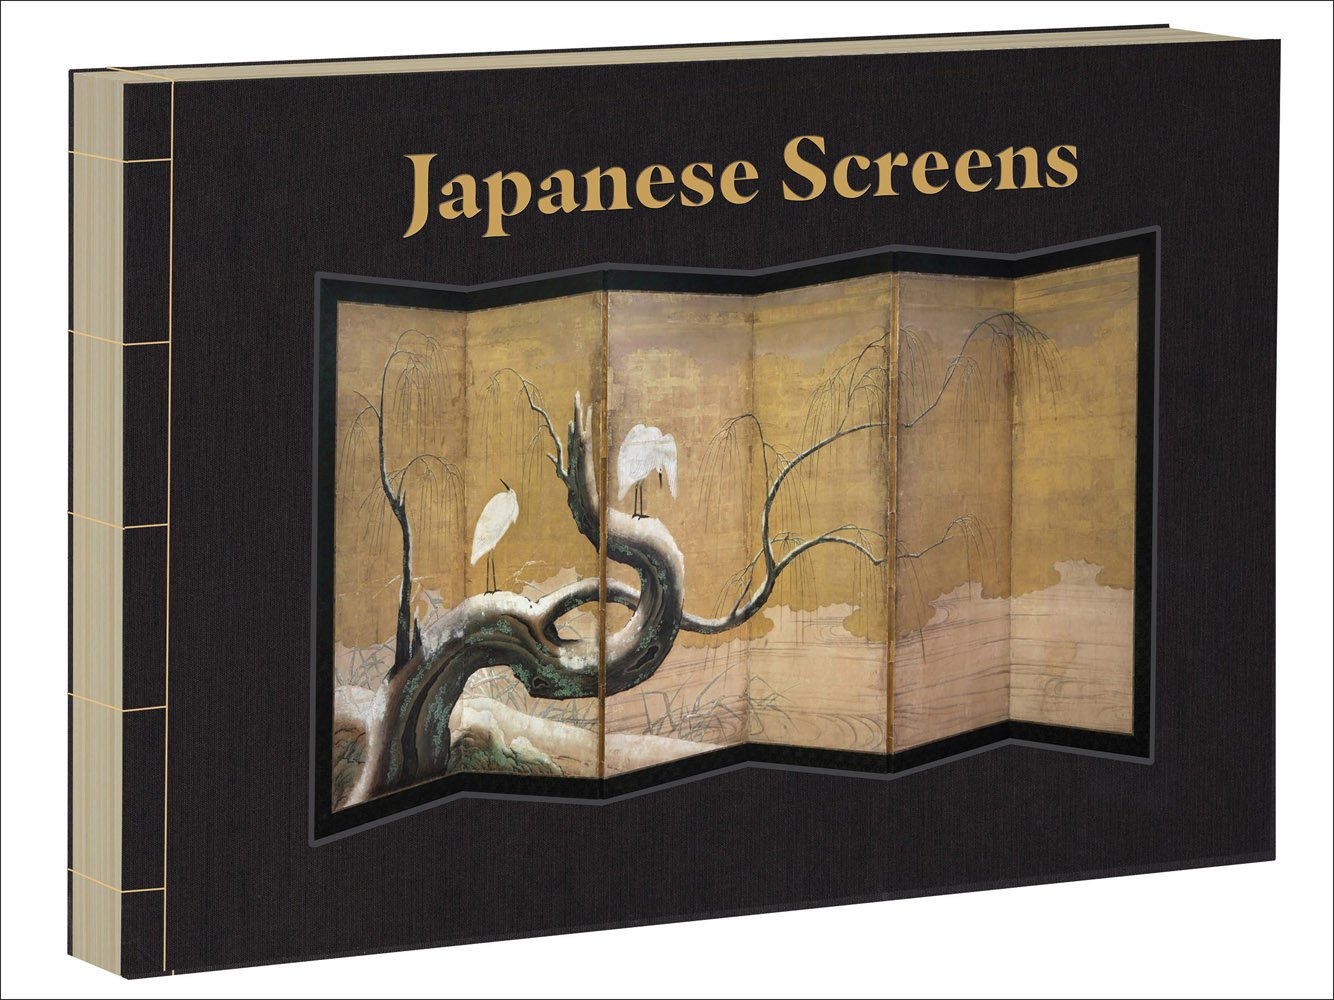 Landscape painting of a leafless tree with curled trunk framed in black with Japanese Screens in gold font above